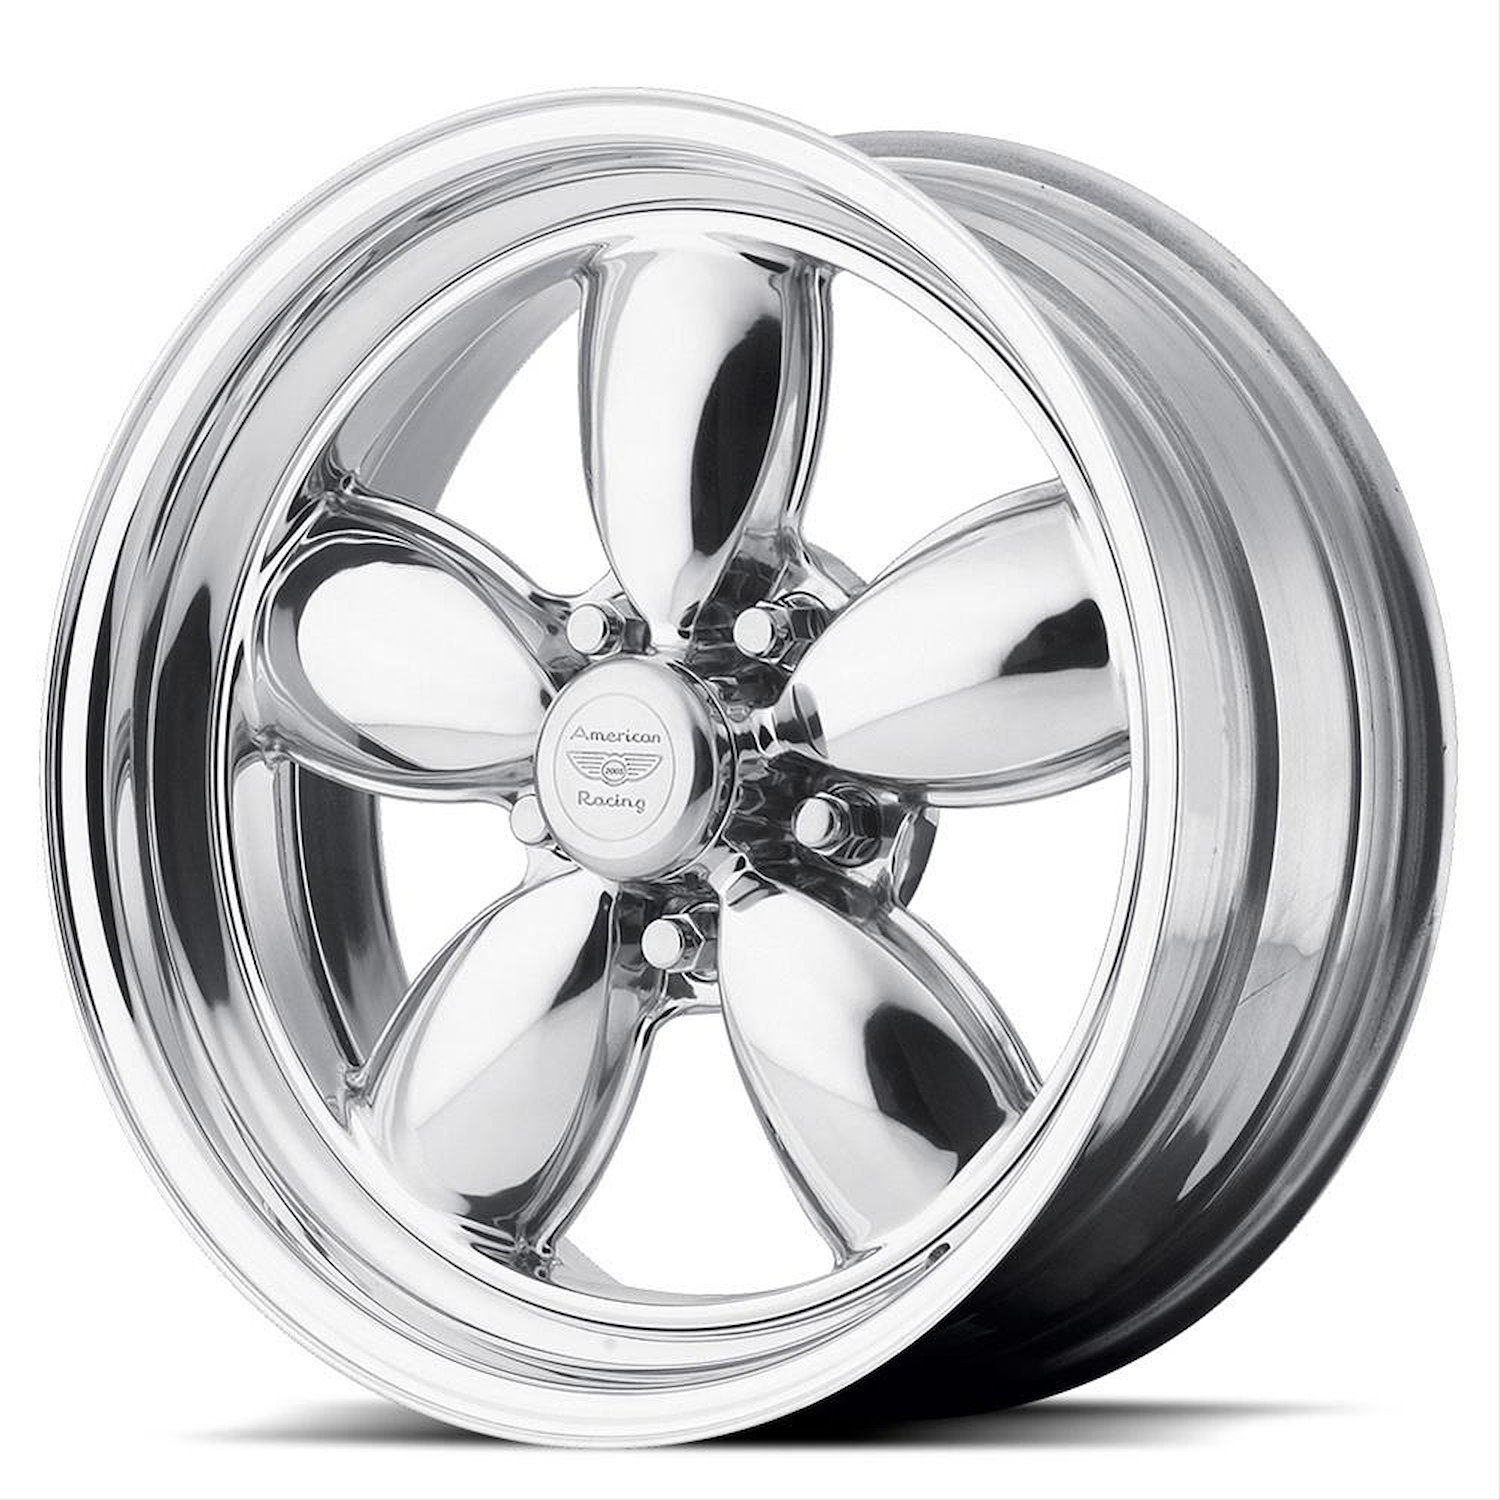 AMERICAN RACING CLASSIC 200S TWO-PIECE POLISHED 17 x 9.5 5X4.75 19 6.00